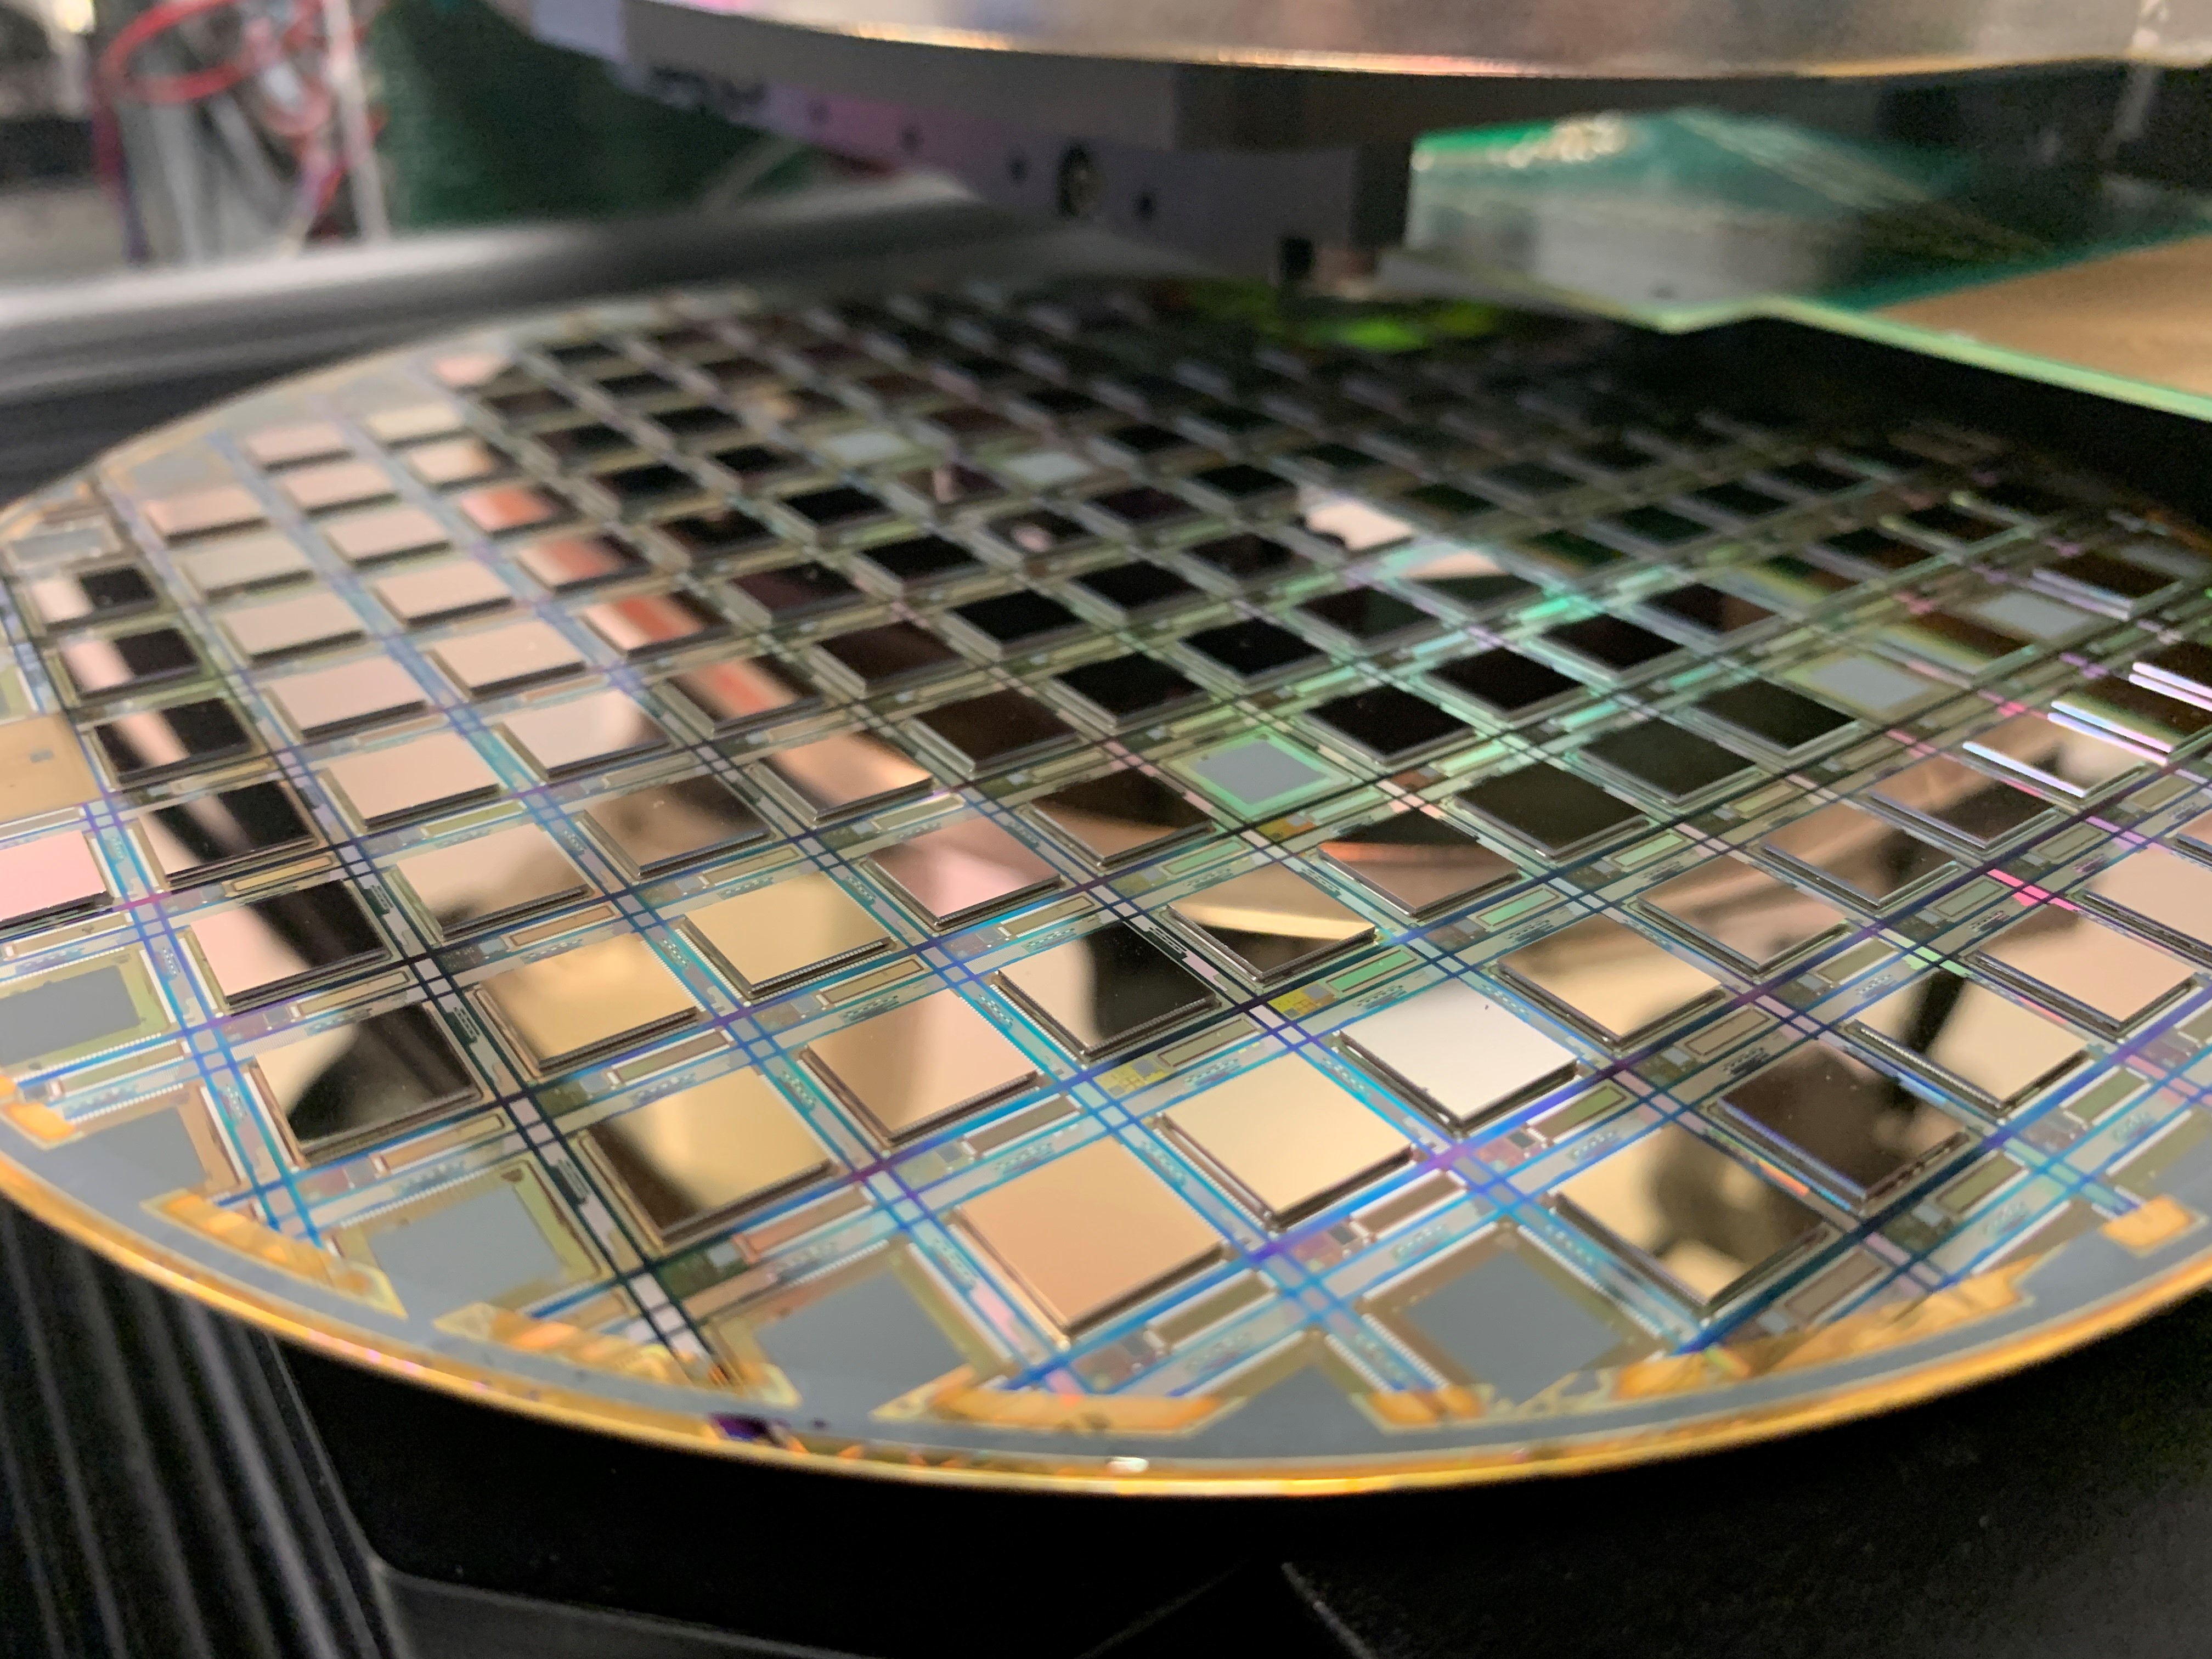 200 mm Si-CMOS wafers with IR detectors processed on it by NIT